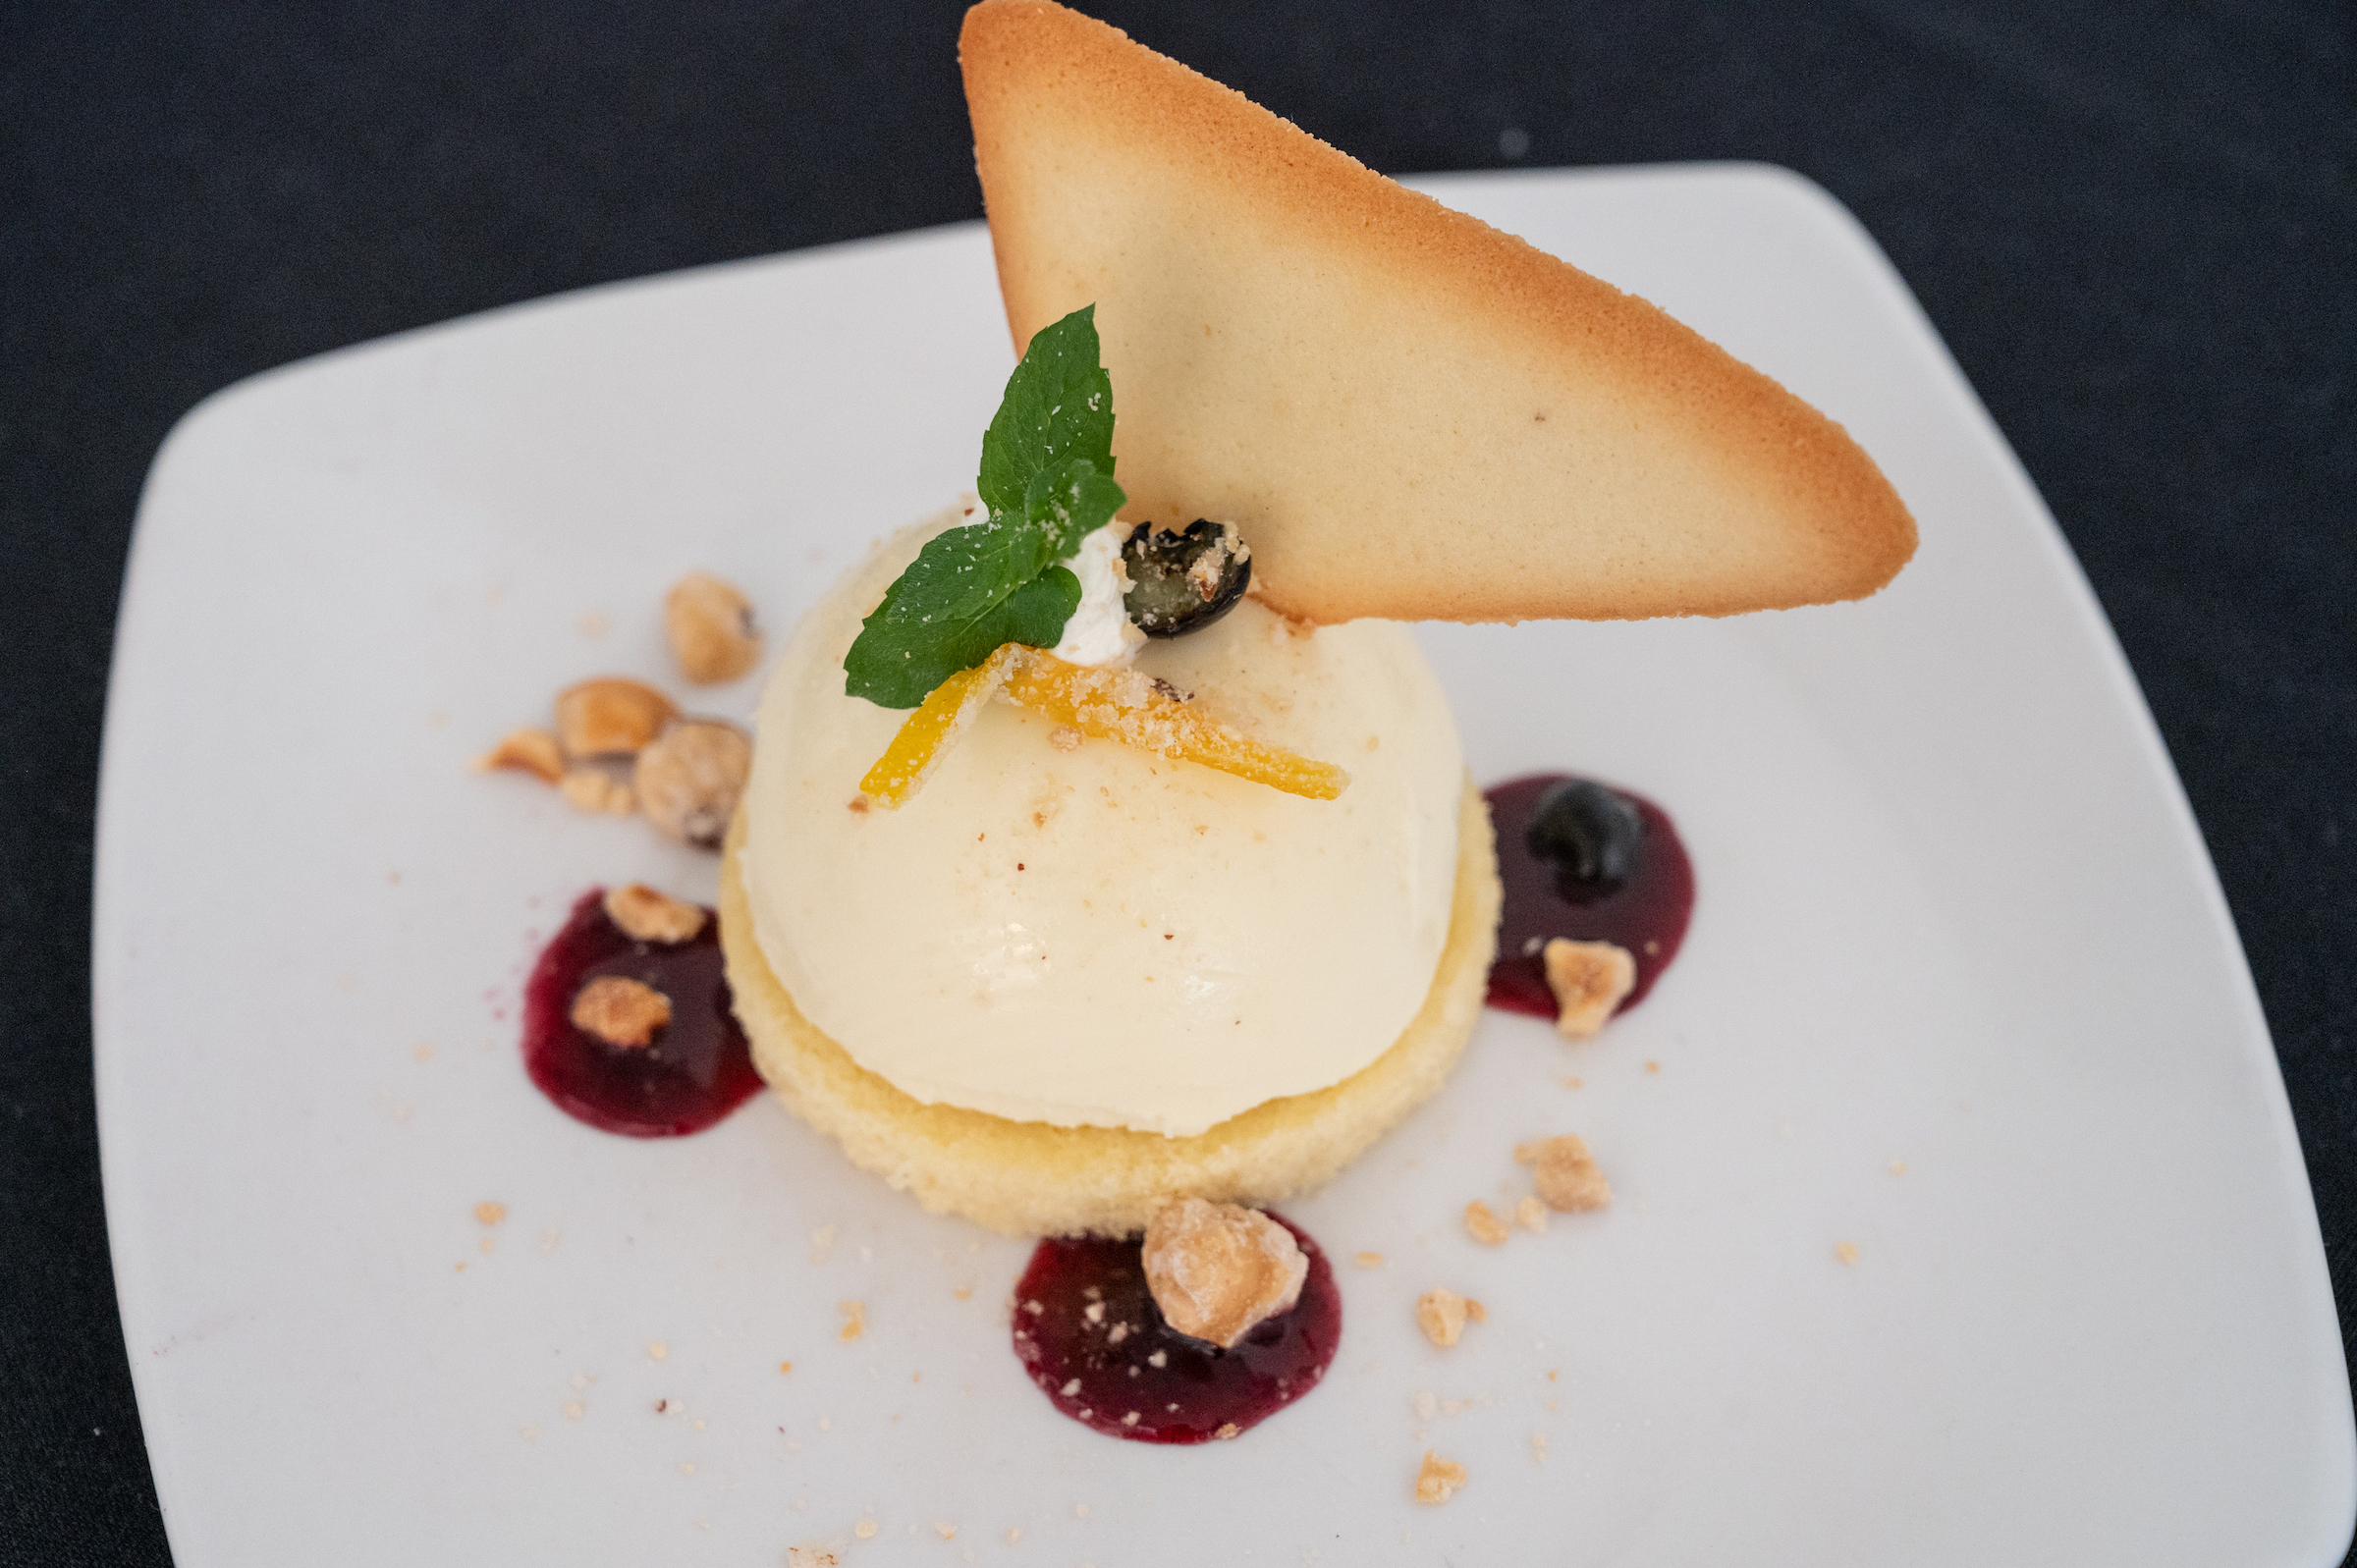 Citrus panna cotta with Myer lemon, blueberry compote and nut crumble